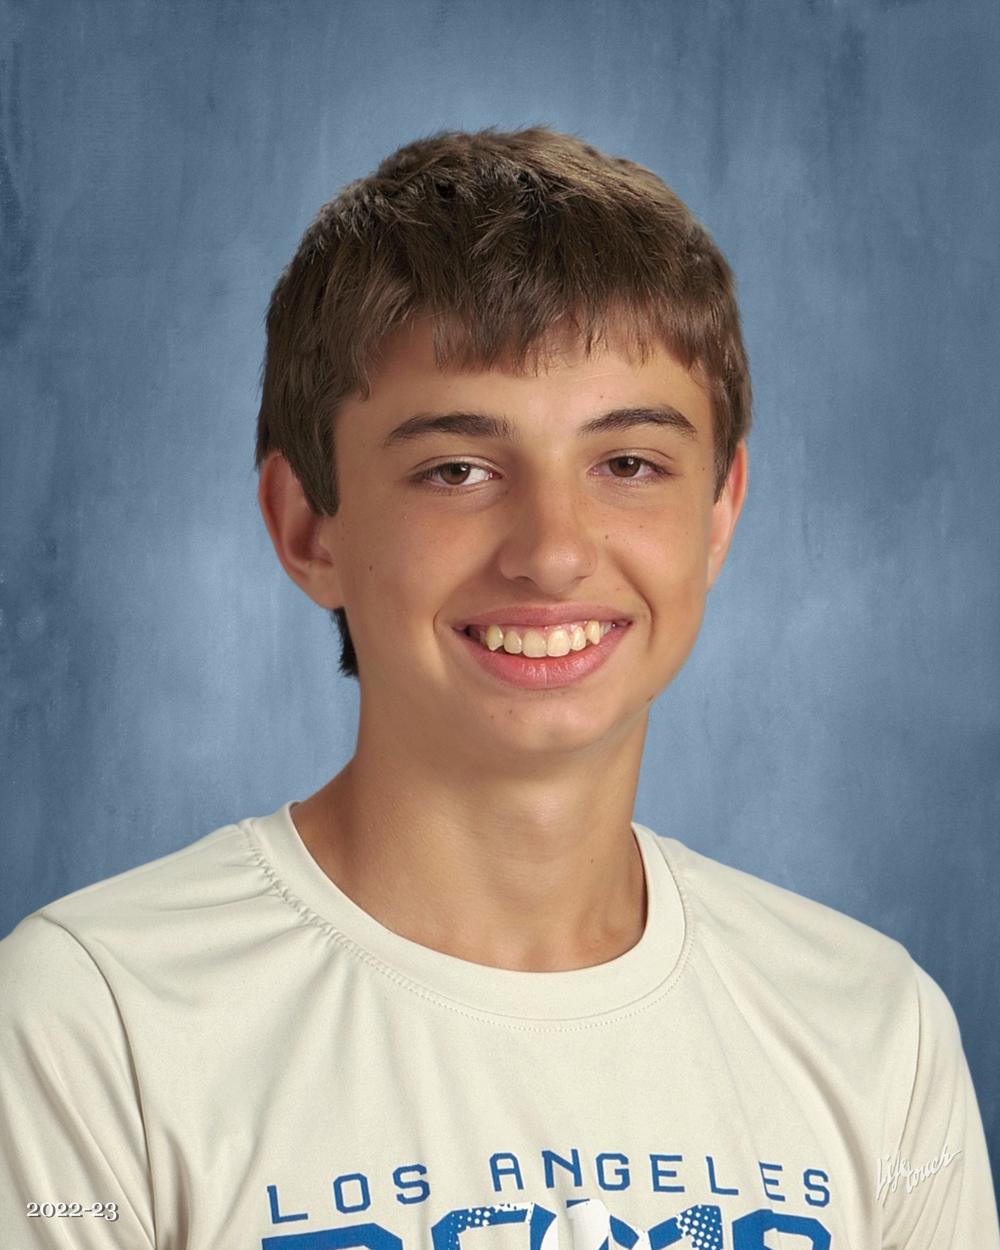 Austin McEntyre is shown in a yearbook photo from Heard County High School